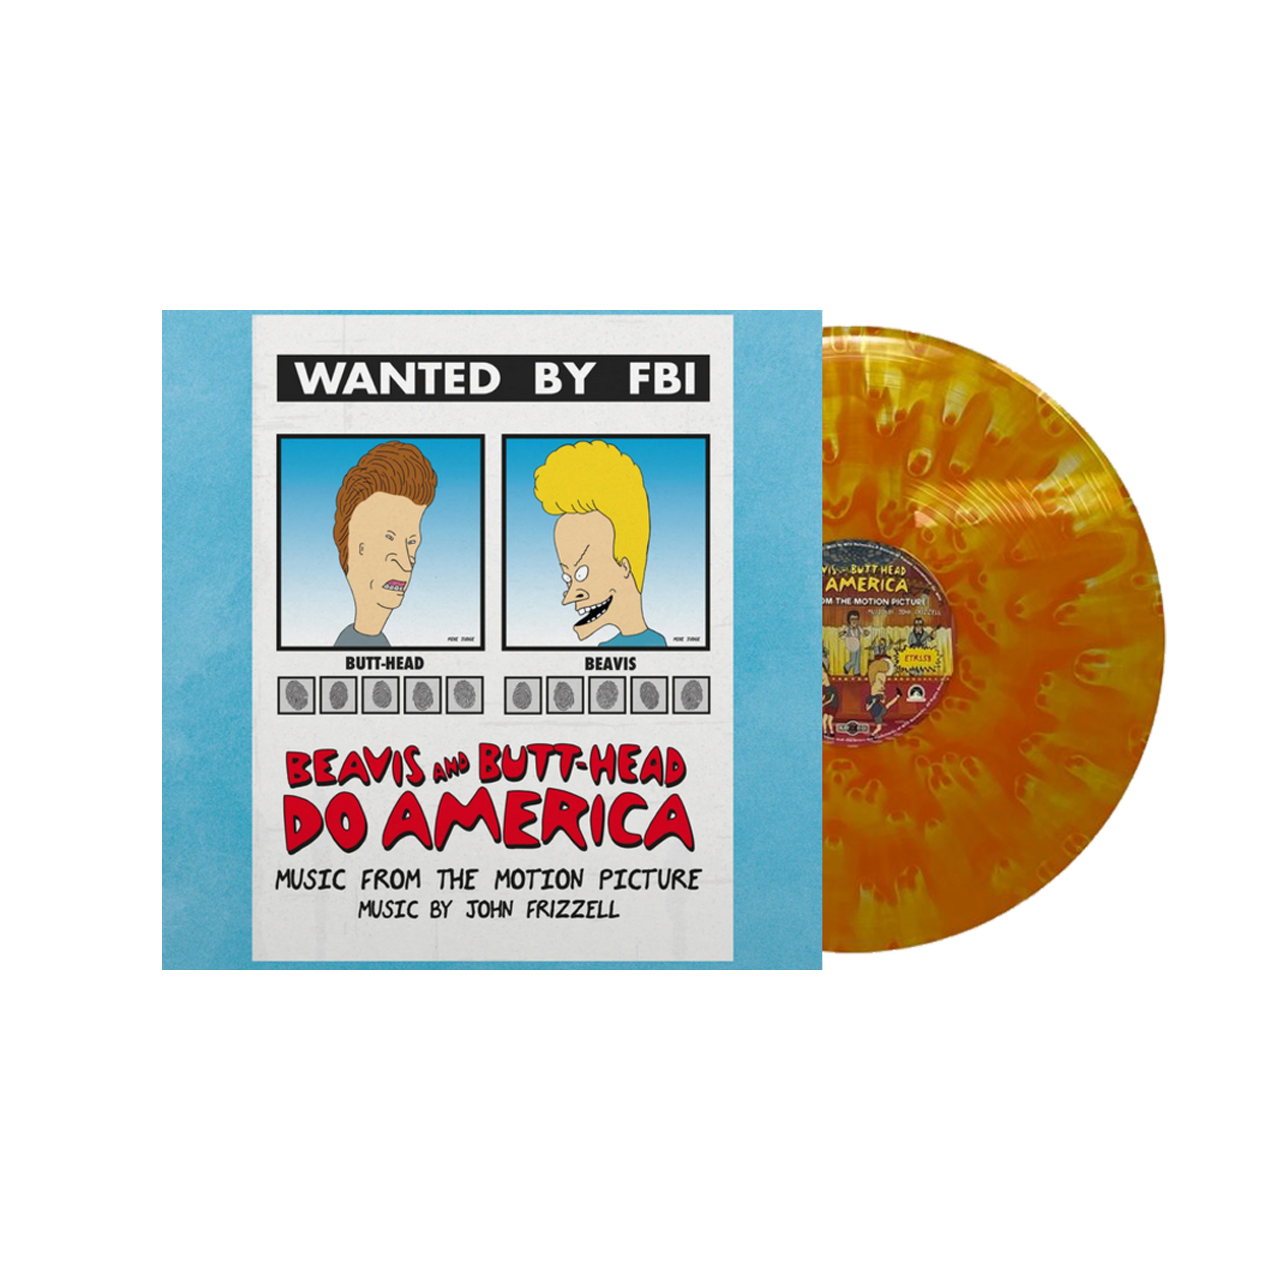 ashley patnode recommends Beavis And Butthead Do America Full